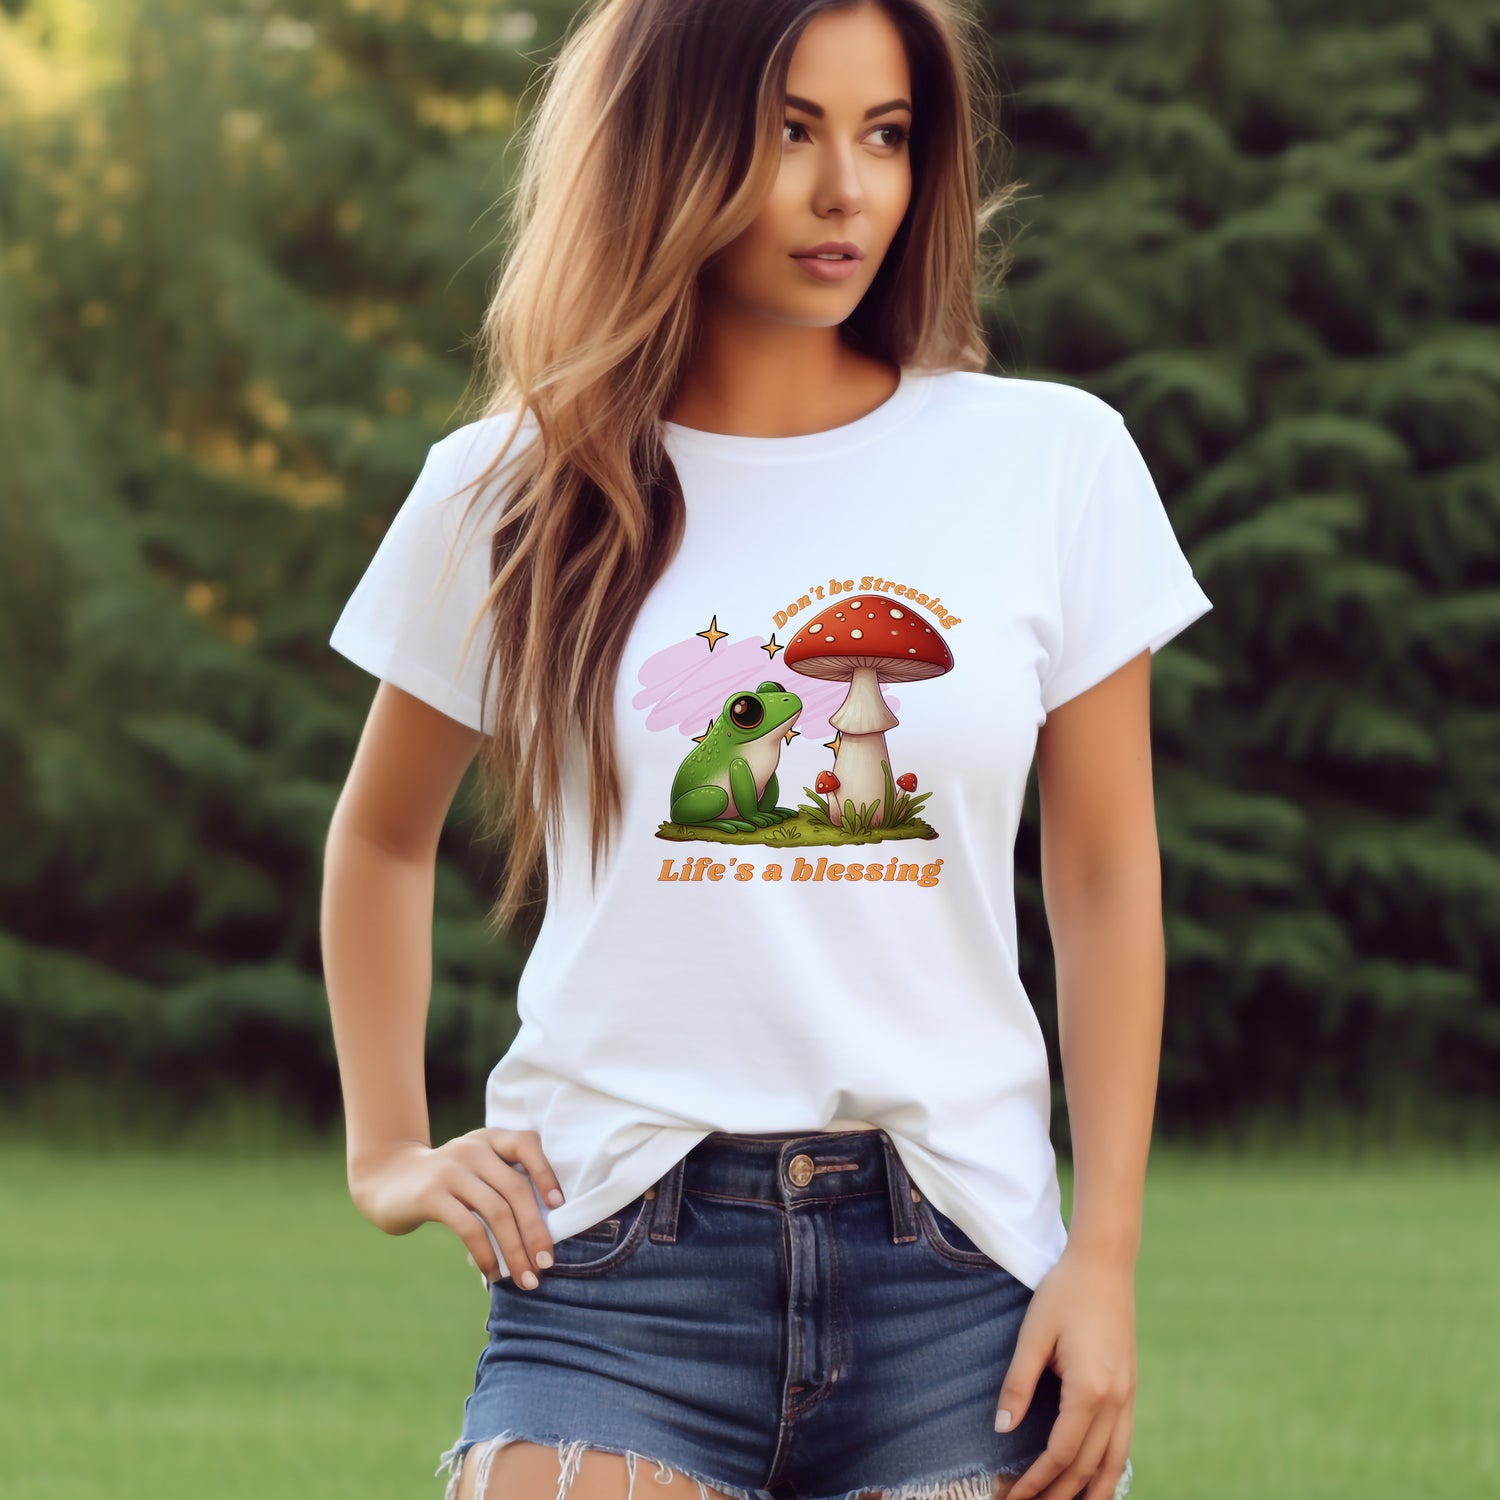 young woman wearing a cottage core tshirt